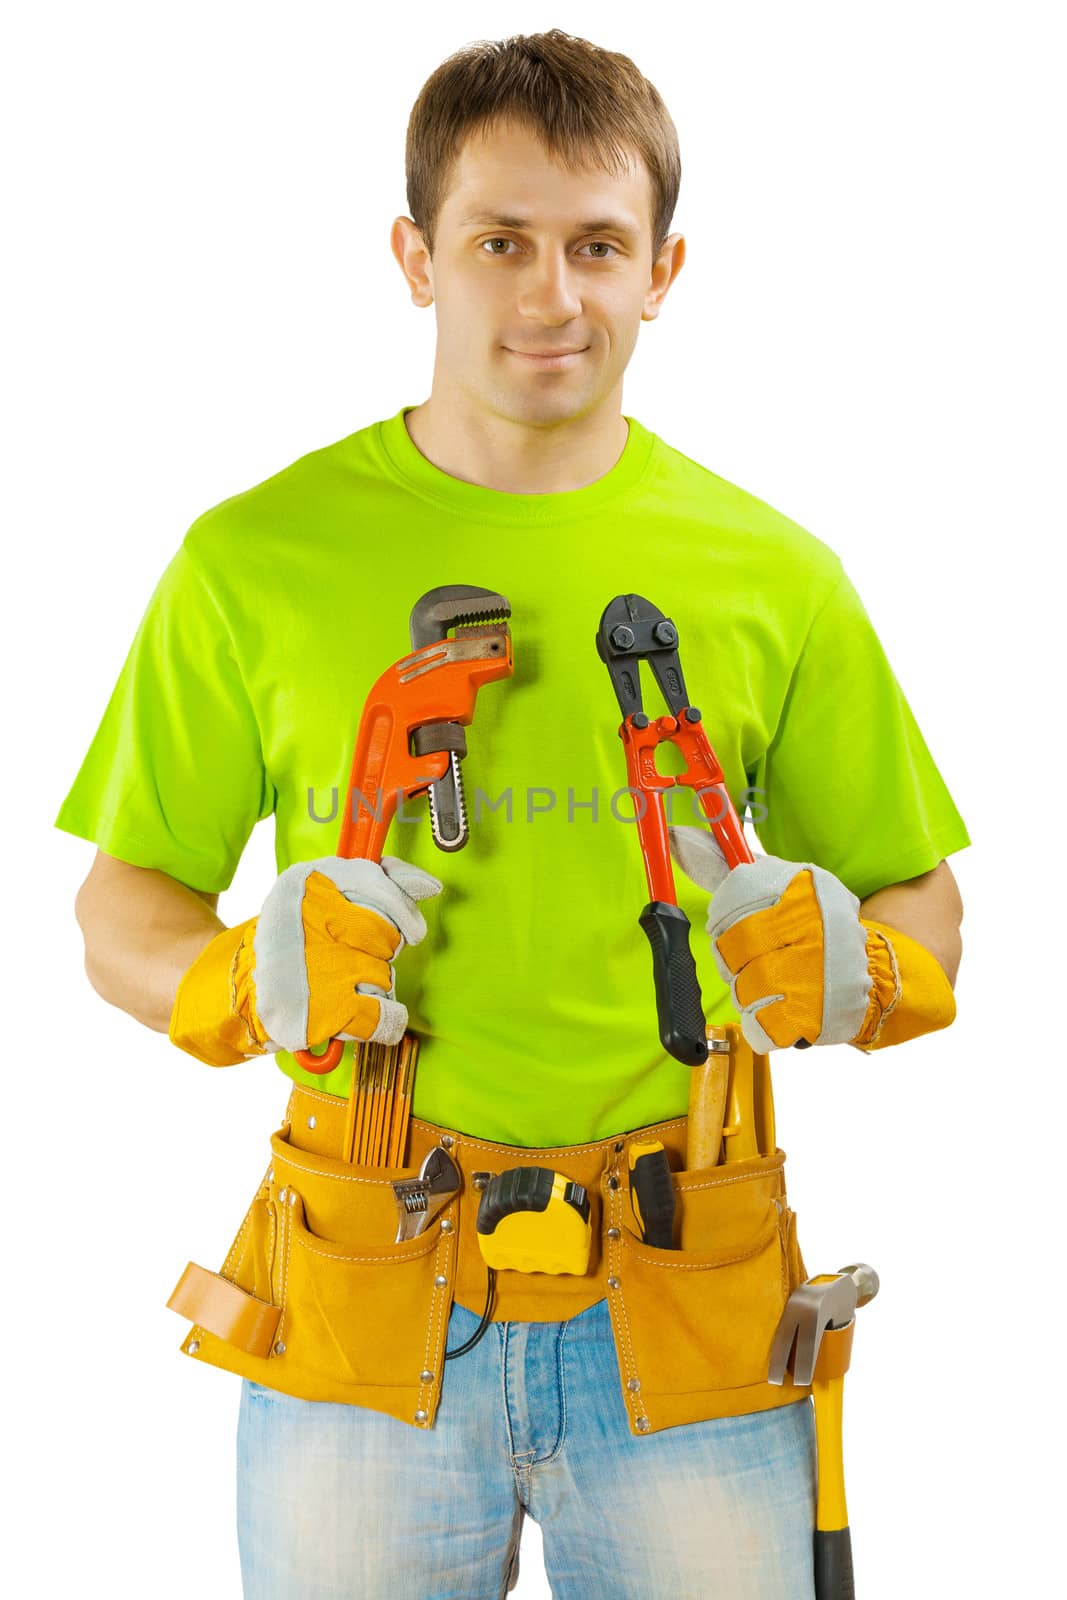 a worker with tools